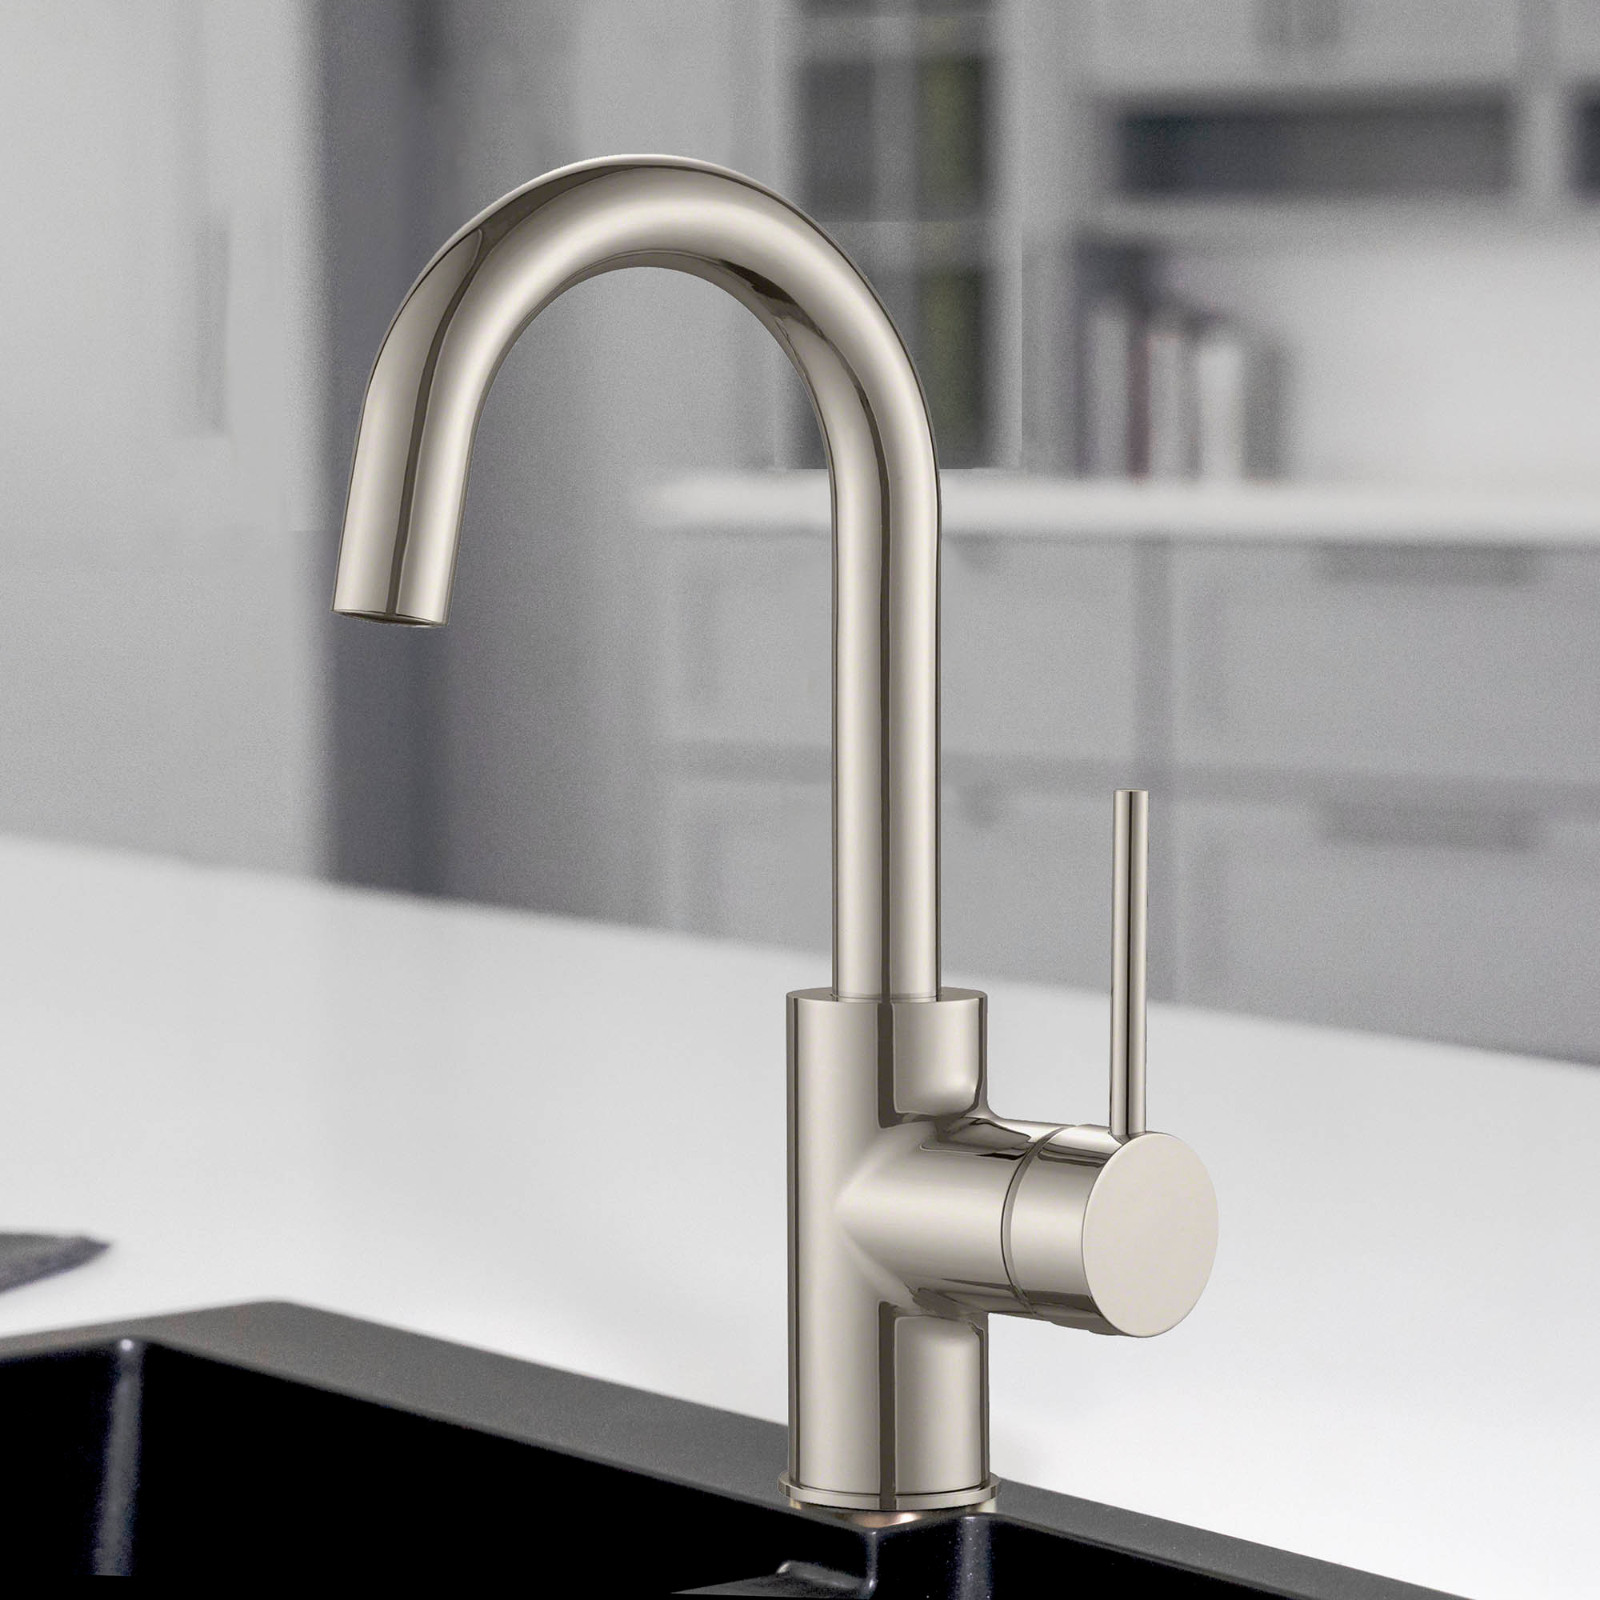  WOODBRIDGE WK02003BN ADA Compliance Deck Mount Single Handle Bar Faucet with Swivel Spout, Brushed Nickel Finish_9442